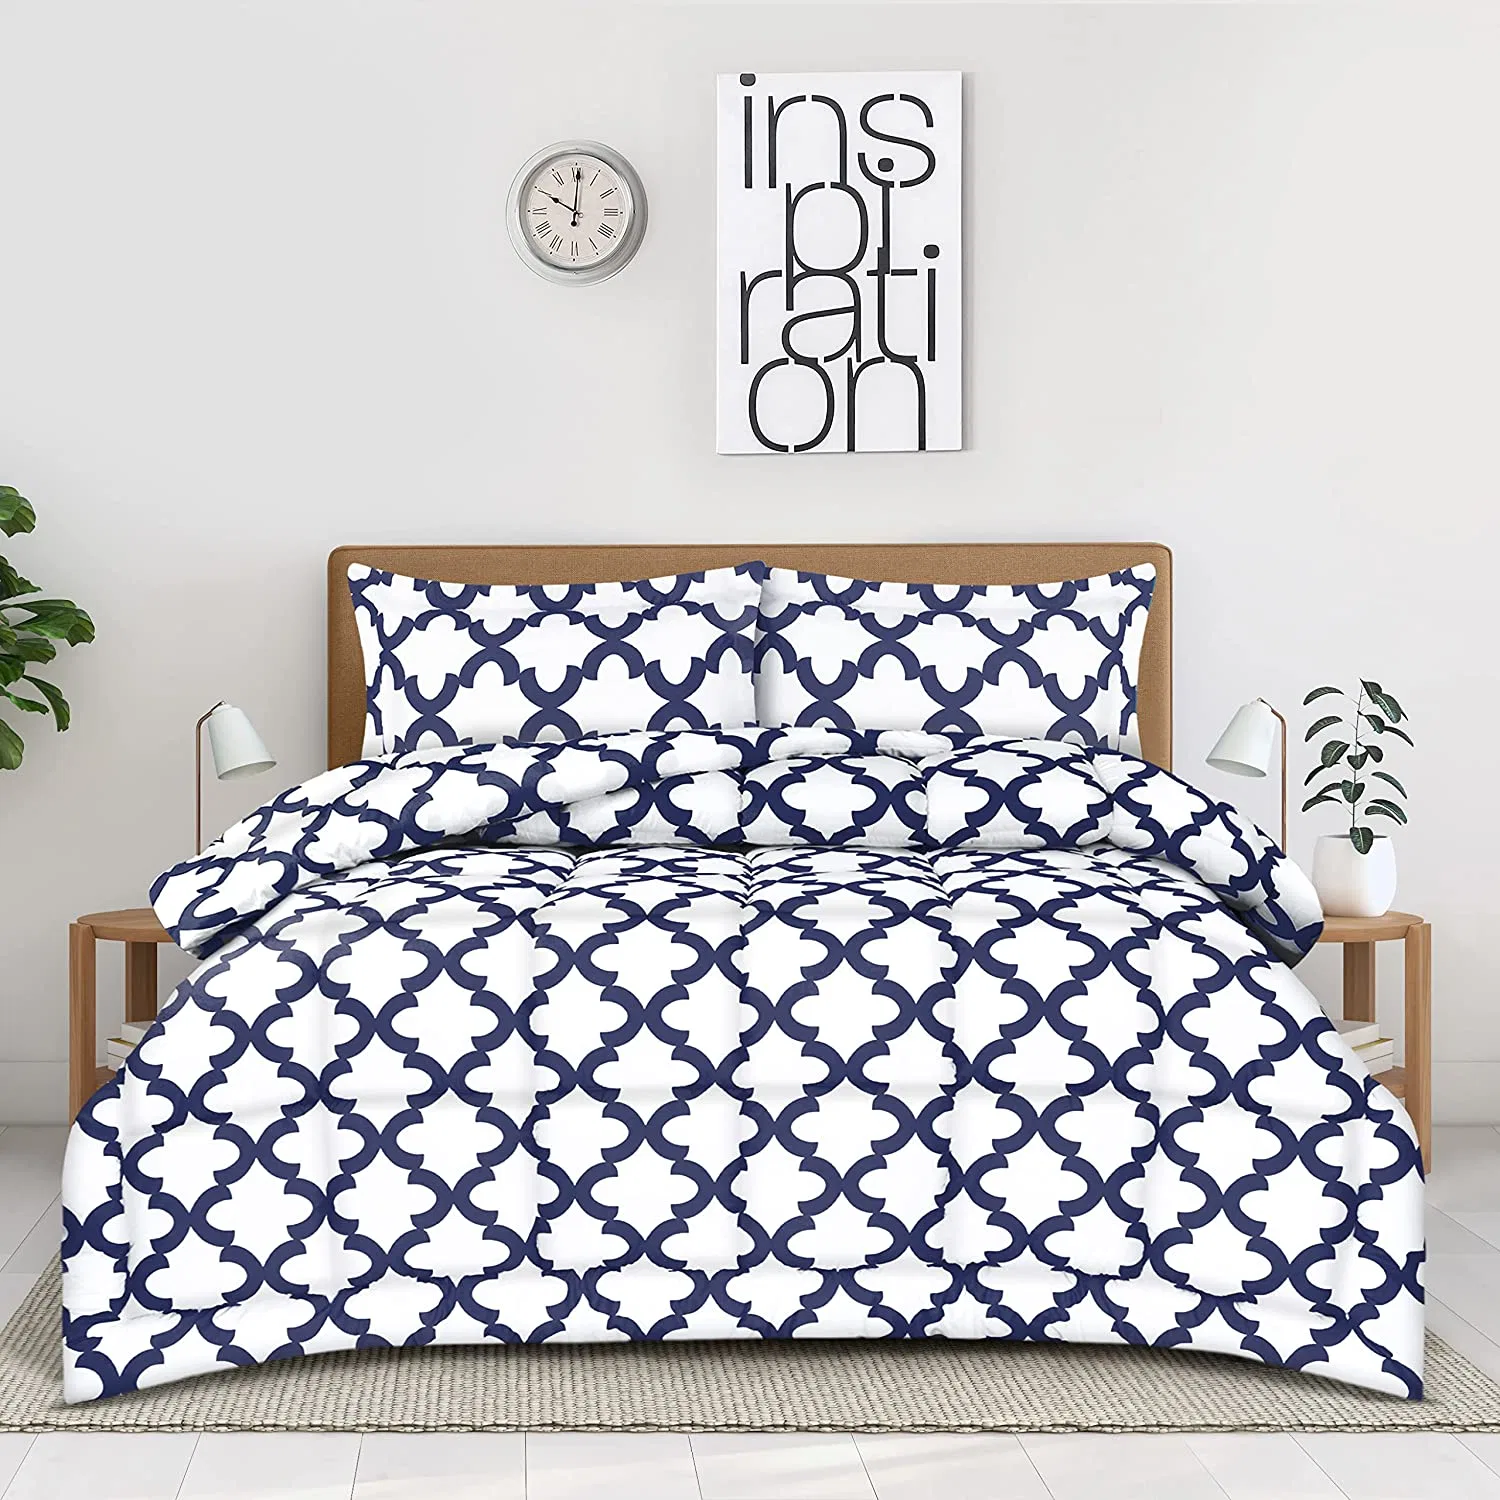 Bedding Queen Comforter Set (White Navy) with 2 Pillow Shams - Bedding Comforter Sets - Down Alternative Comforter - Soft and Comfortable